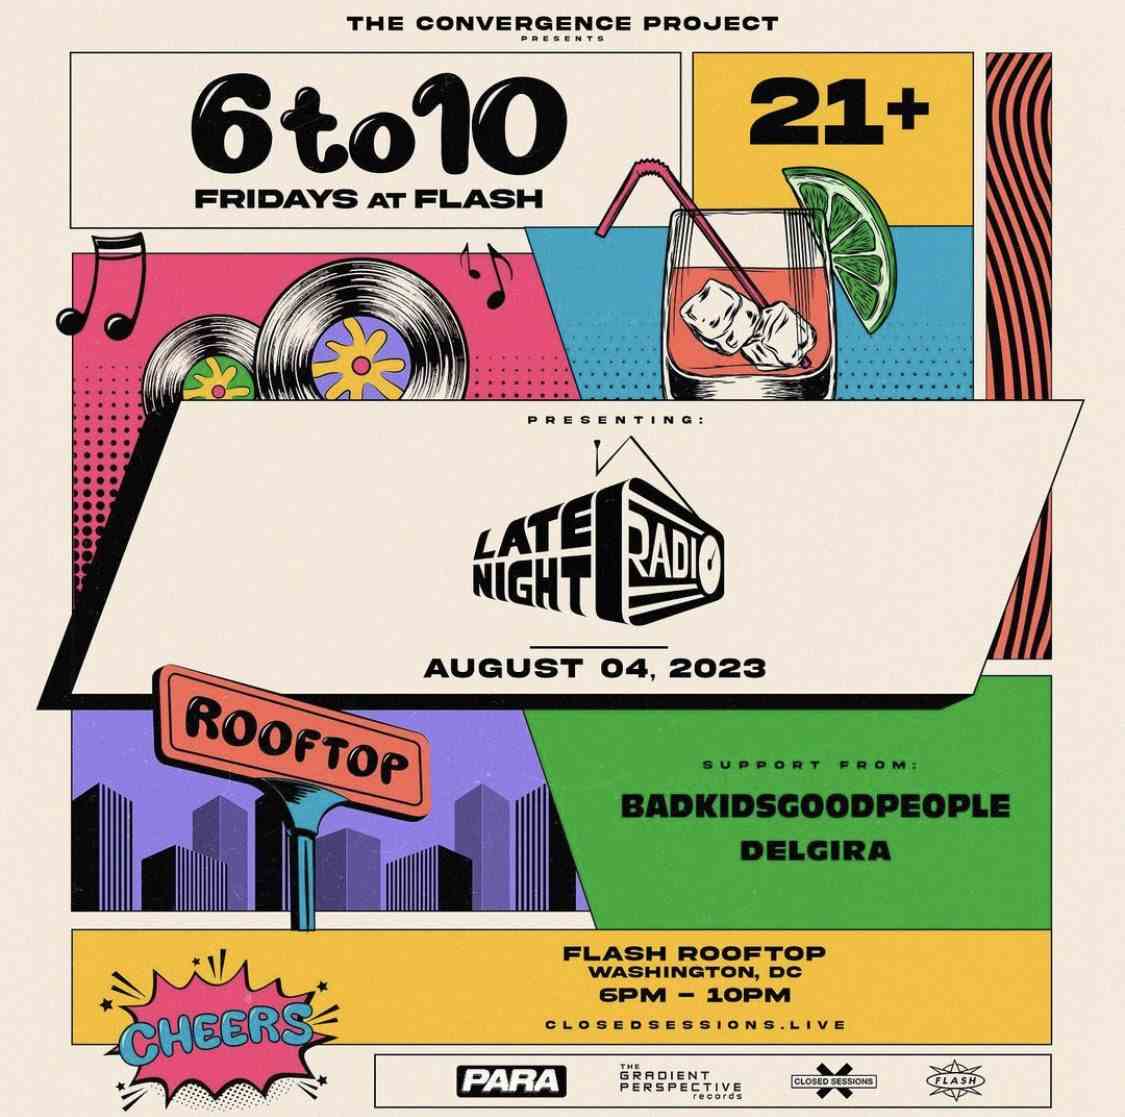 Fridays At Flash: Late Night Radio (early show) event flyer